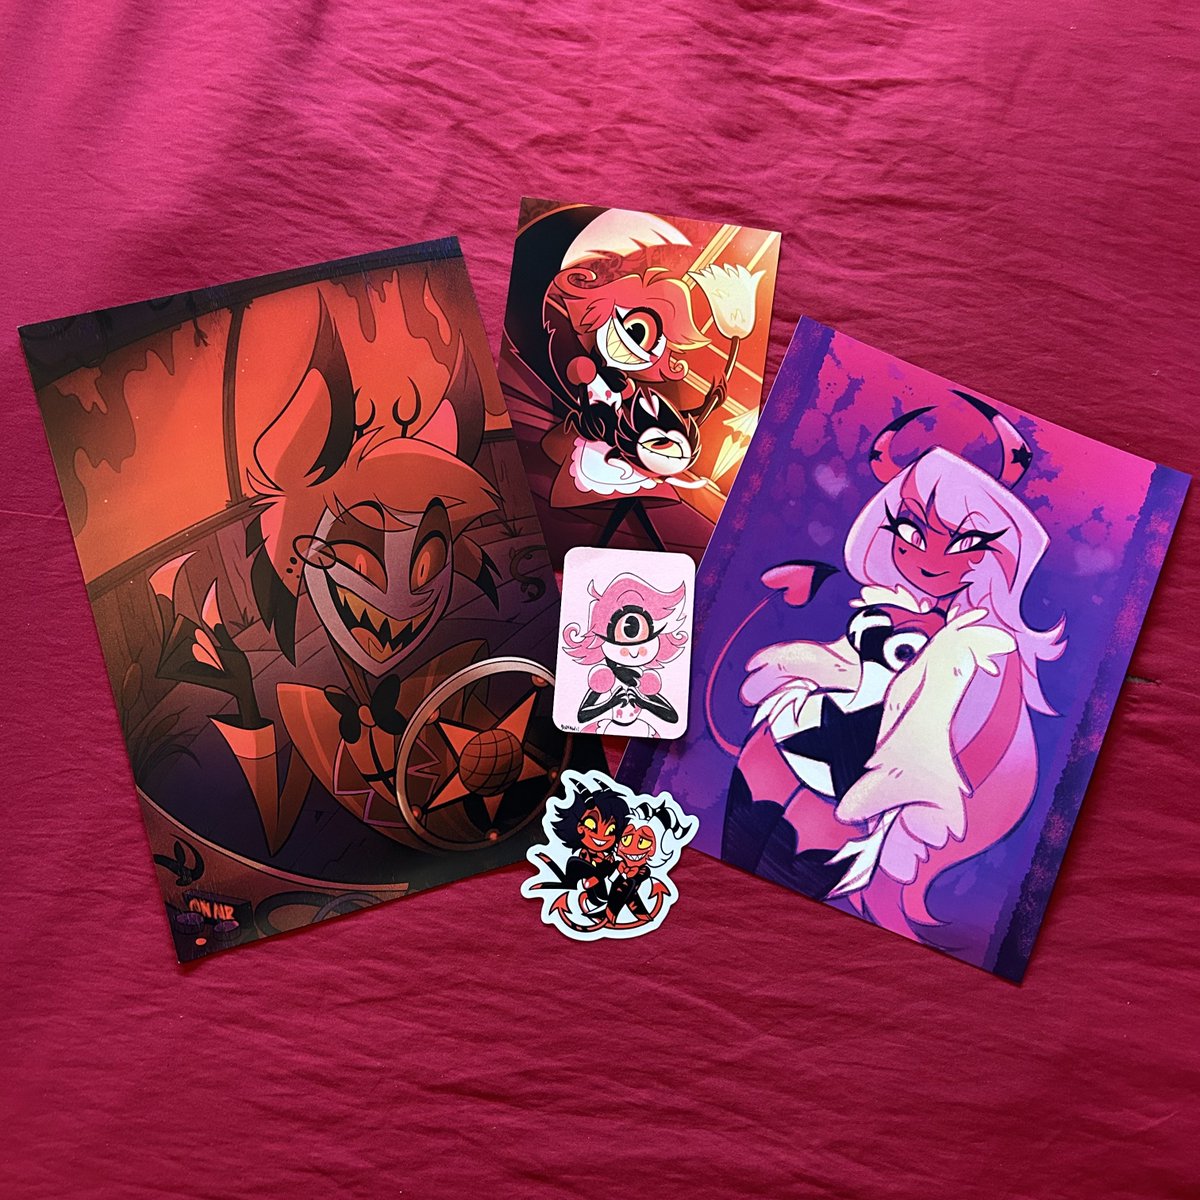 I got obsessed with Hazbin Hotel and Helluva Boss early in the year and felt a big urge to get merch of my faves as a birthday gift to myself. Picked these awesome prints and sticker off of @sinnawii’s shop. I really loved the adorable Niffty drawing included in the package.😊🎉